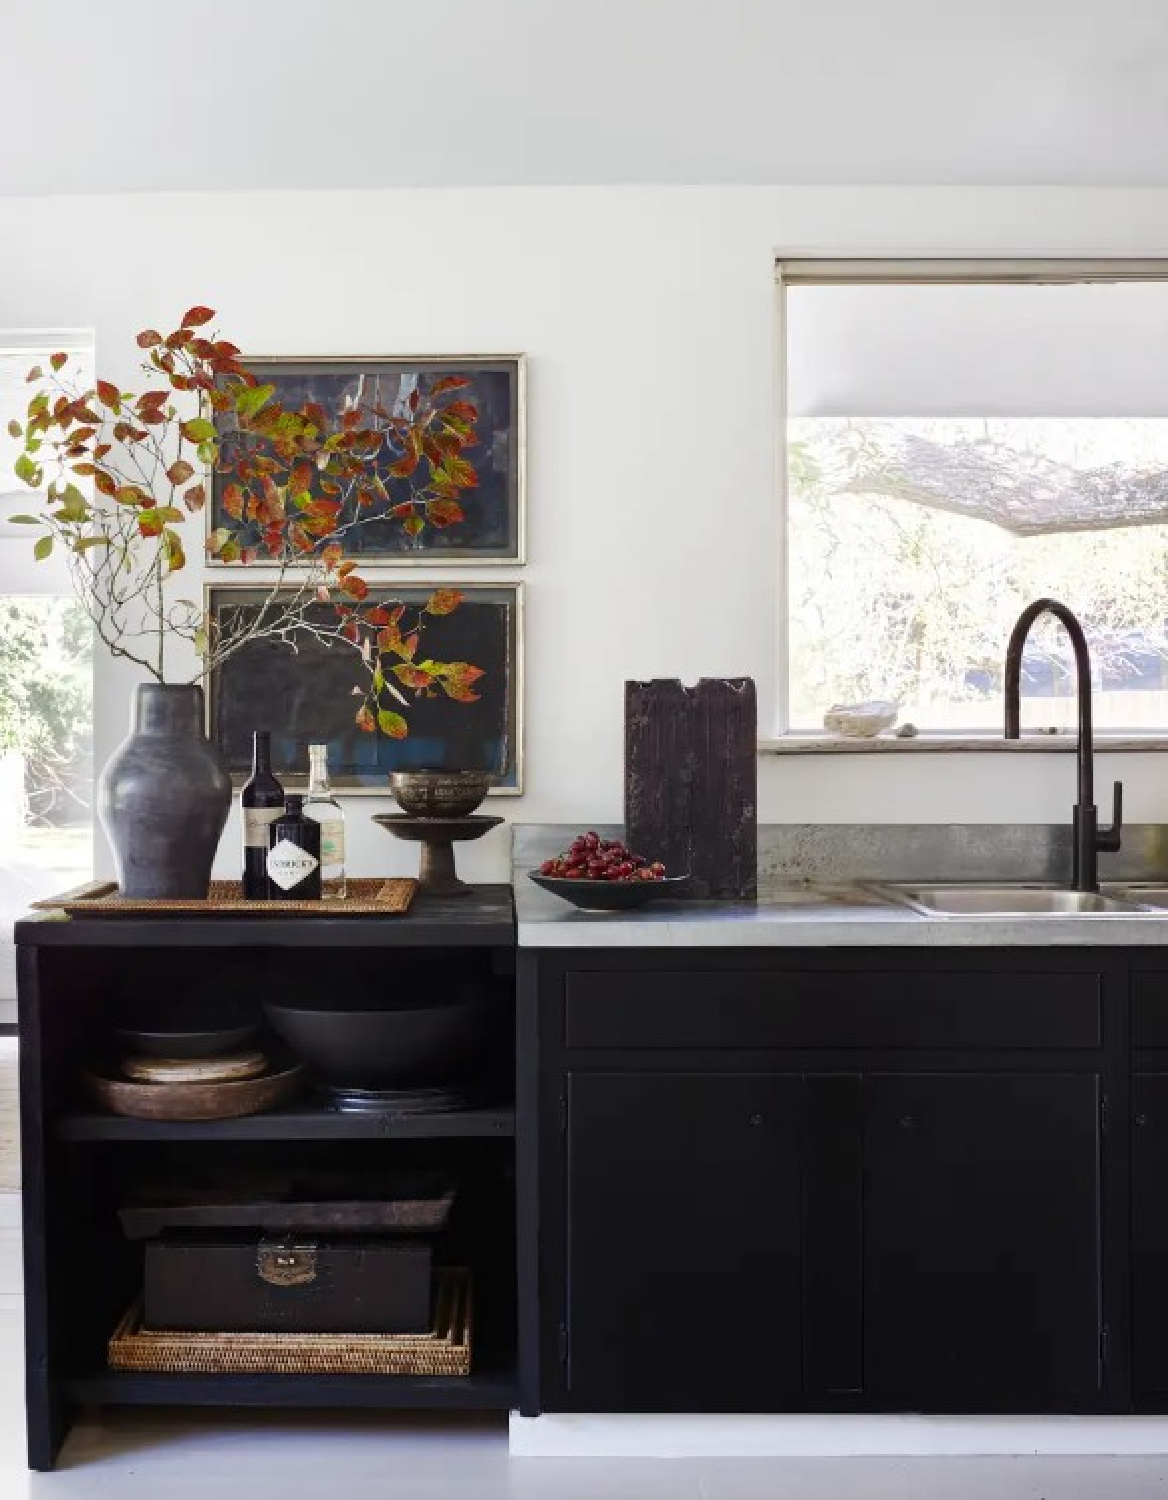 Moody dark base cabinets with crisp white walls in kitchen. Interior design by Michael Del Piero (Richard Powers - photo) for TRAVELED AND TEXTURAL (Beta-Plus, 2023). #modernrustic #michaeldelpiero